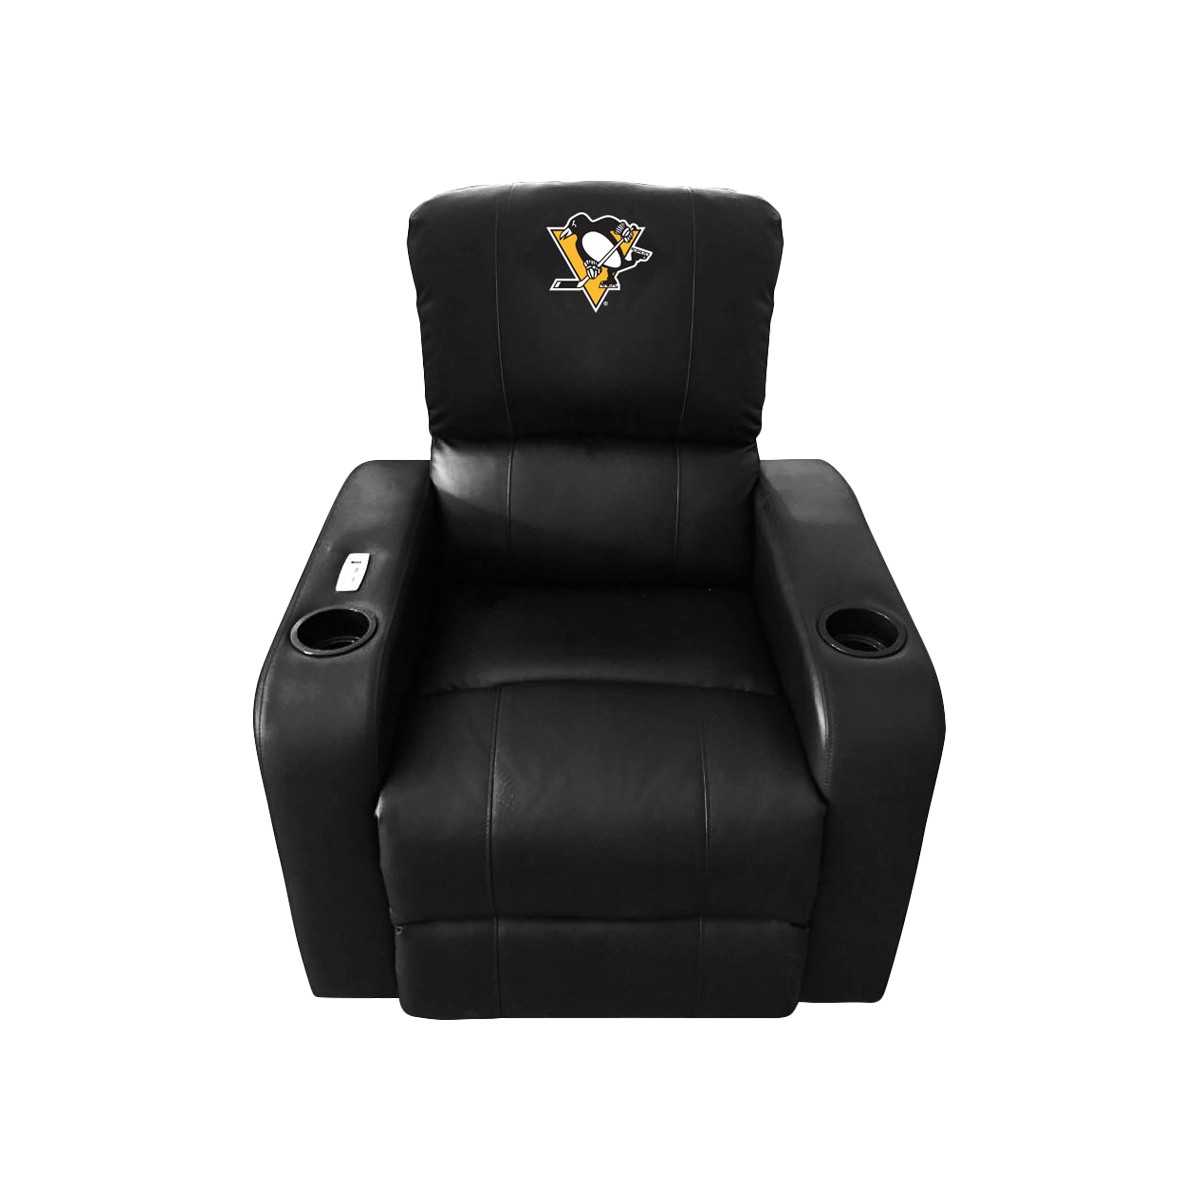 PITTSBURGH PENGUINS POWER THEATHER RECLINER